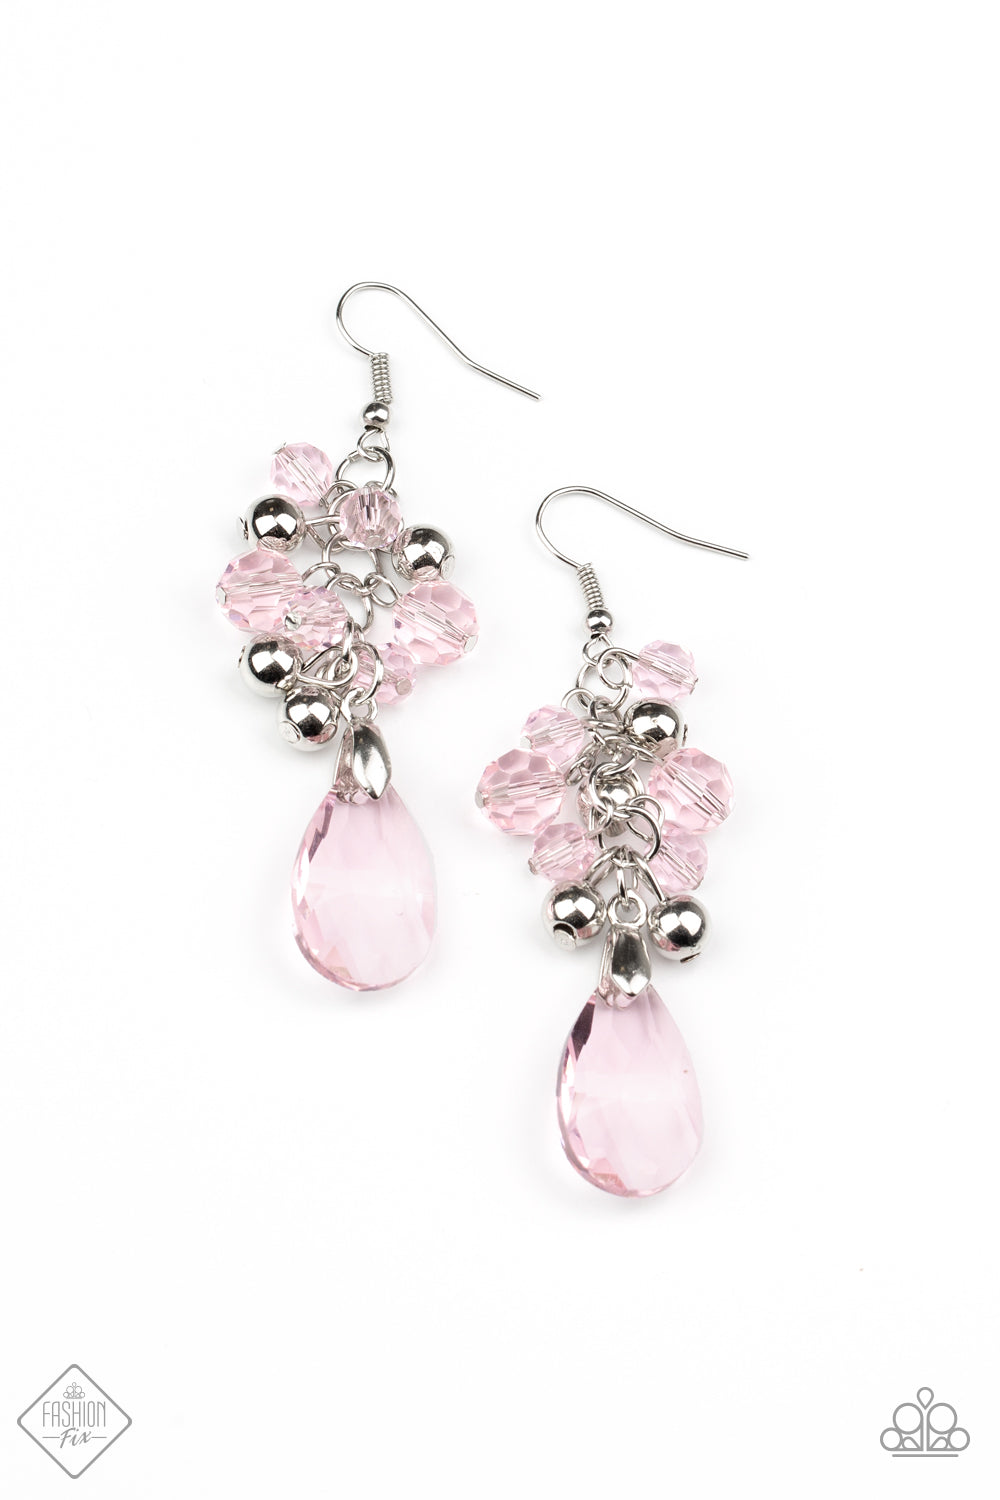 Before and AFTERGLOW Earrings - Pink